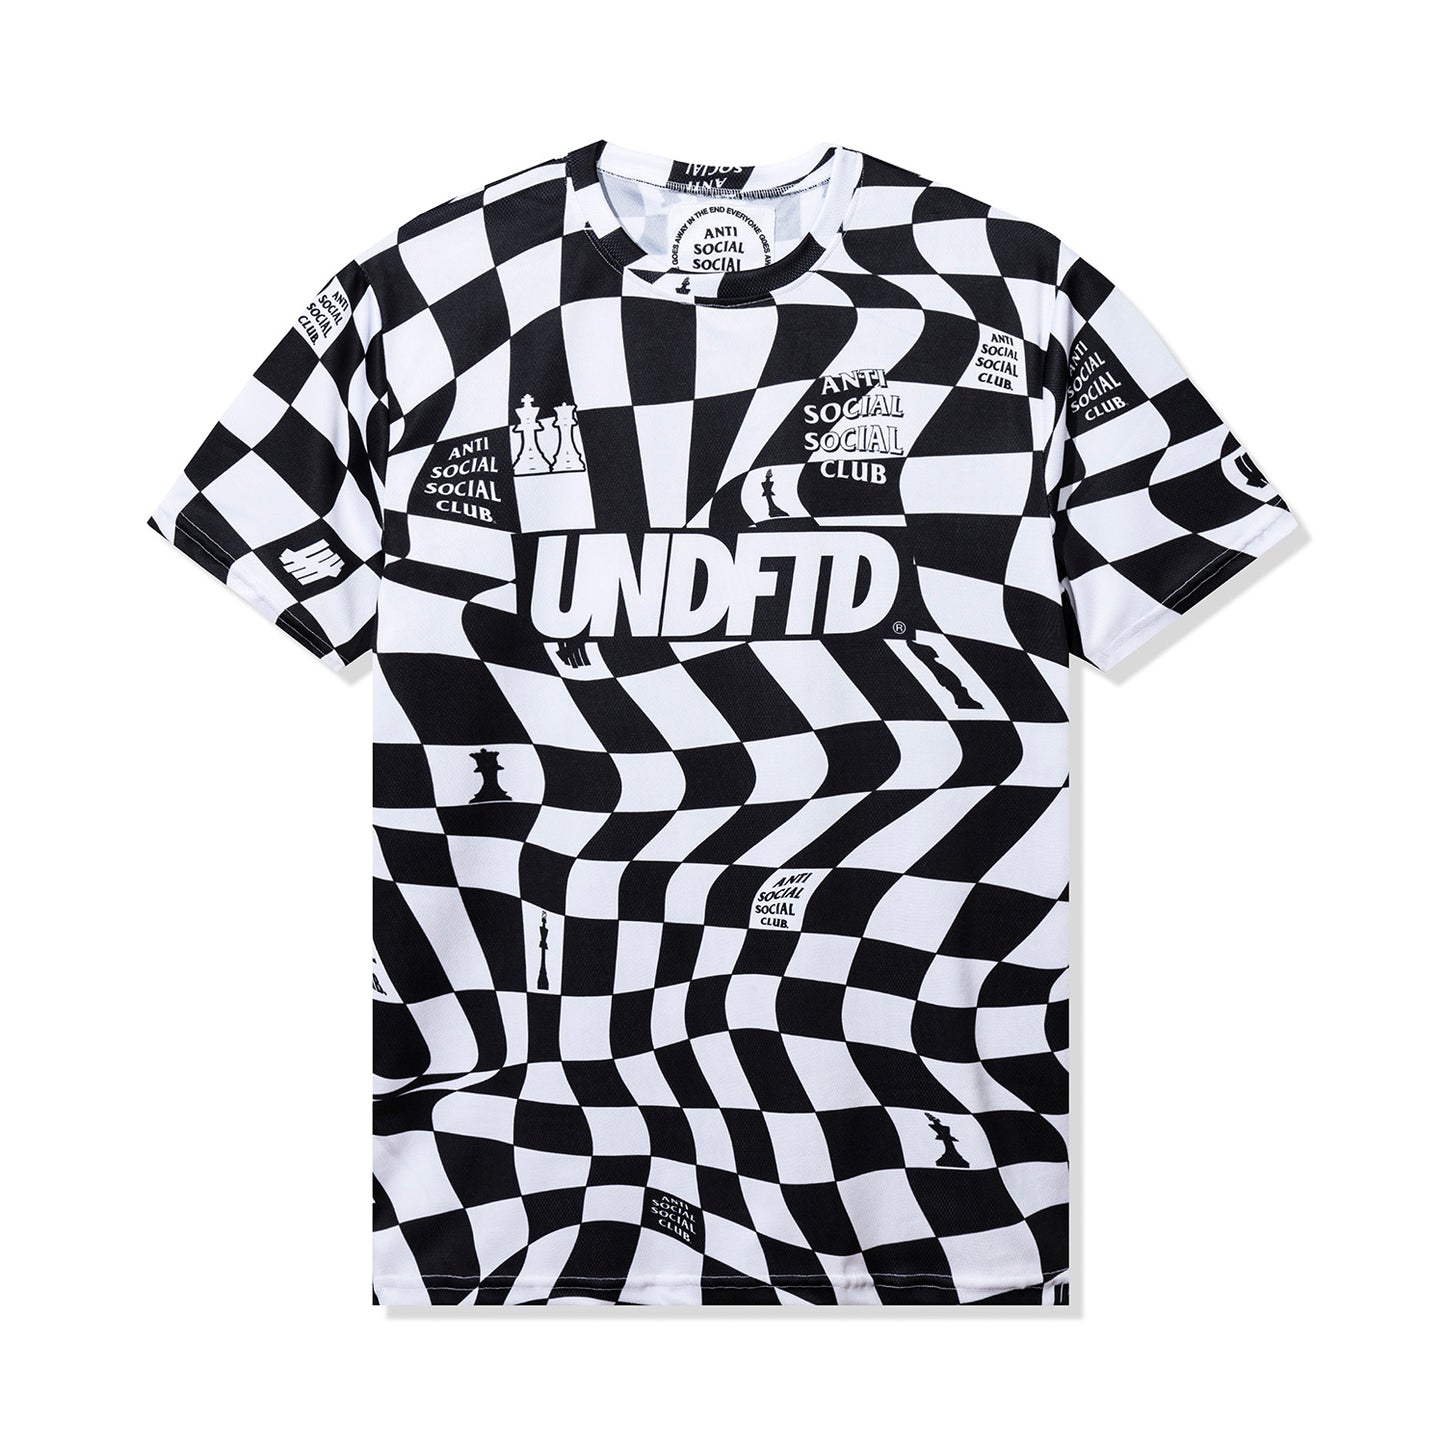 ASSC x Undefeated Submission Jersey - White/Black